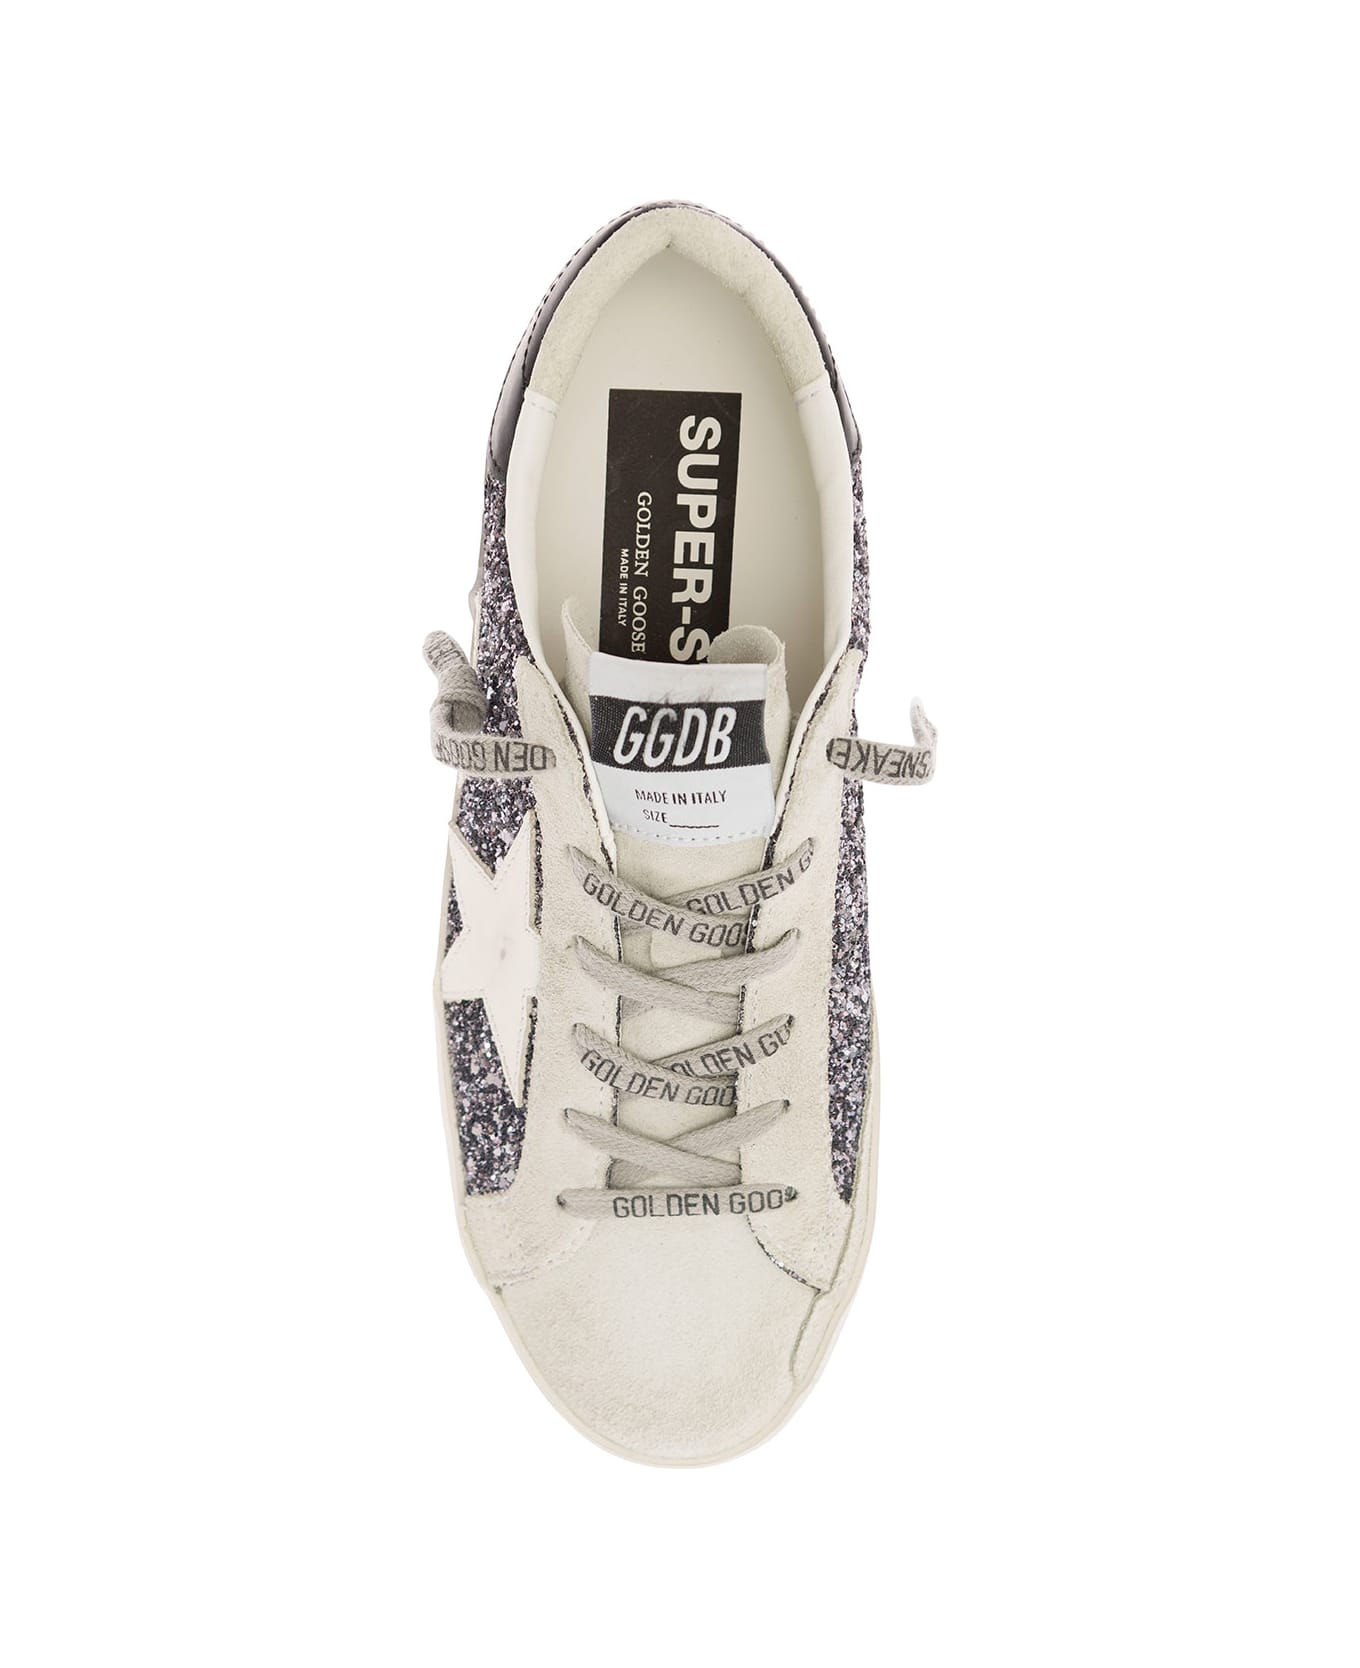 Golden Goose 'superstar' White Low Top Sneakers With Glitters In Vintage Looking Leather Woman - Grey